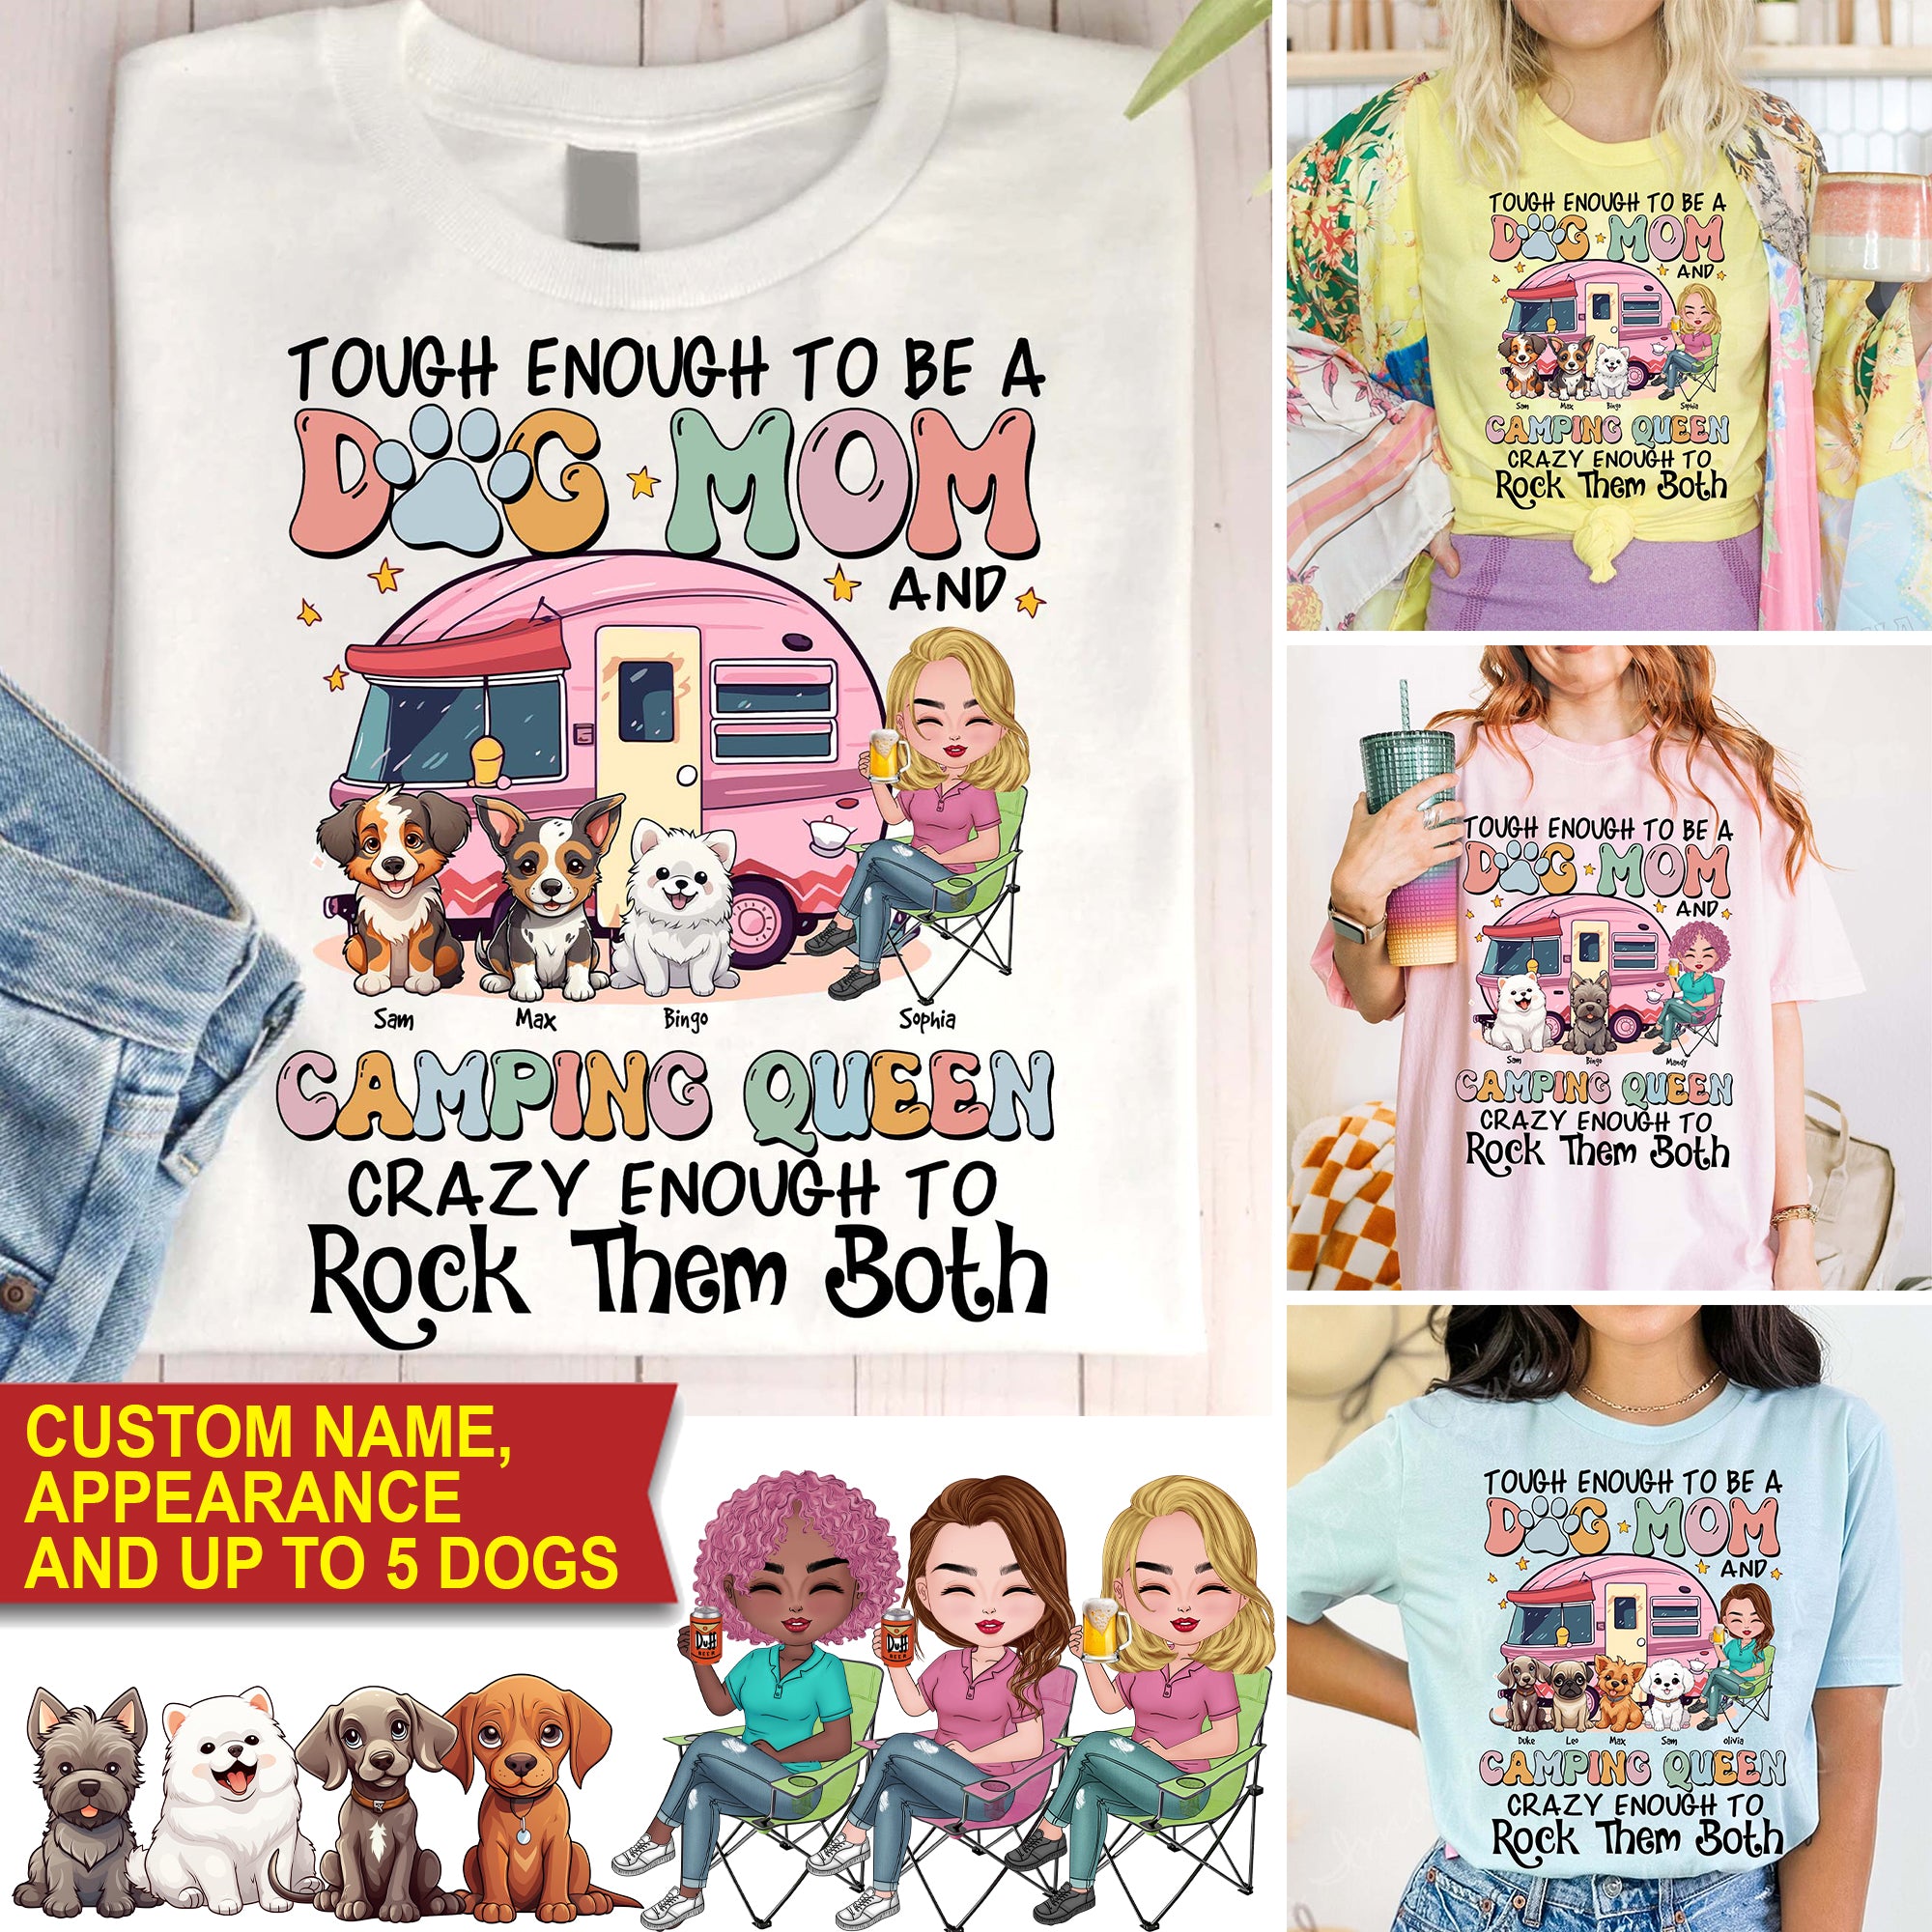 Dog Mom Camping Queen- Custom Appearances And Names - Personalized T-Shirt - Gift For Camping, Gift For Pet Lover